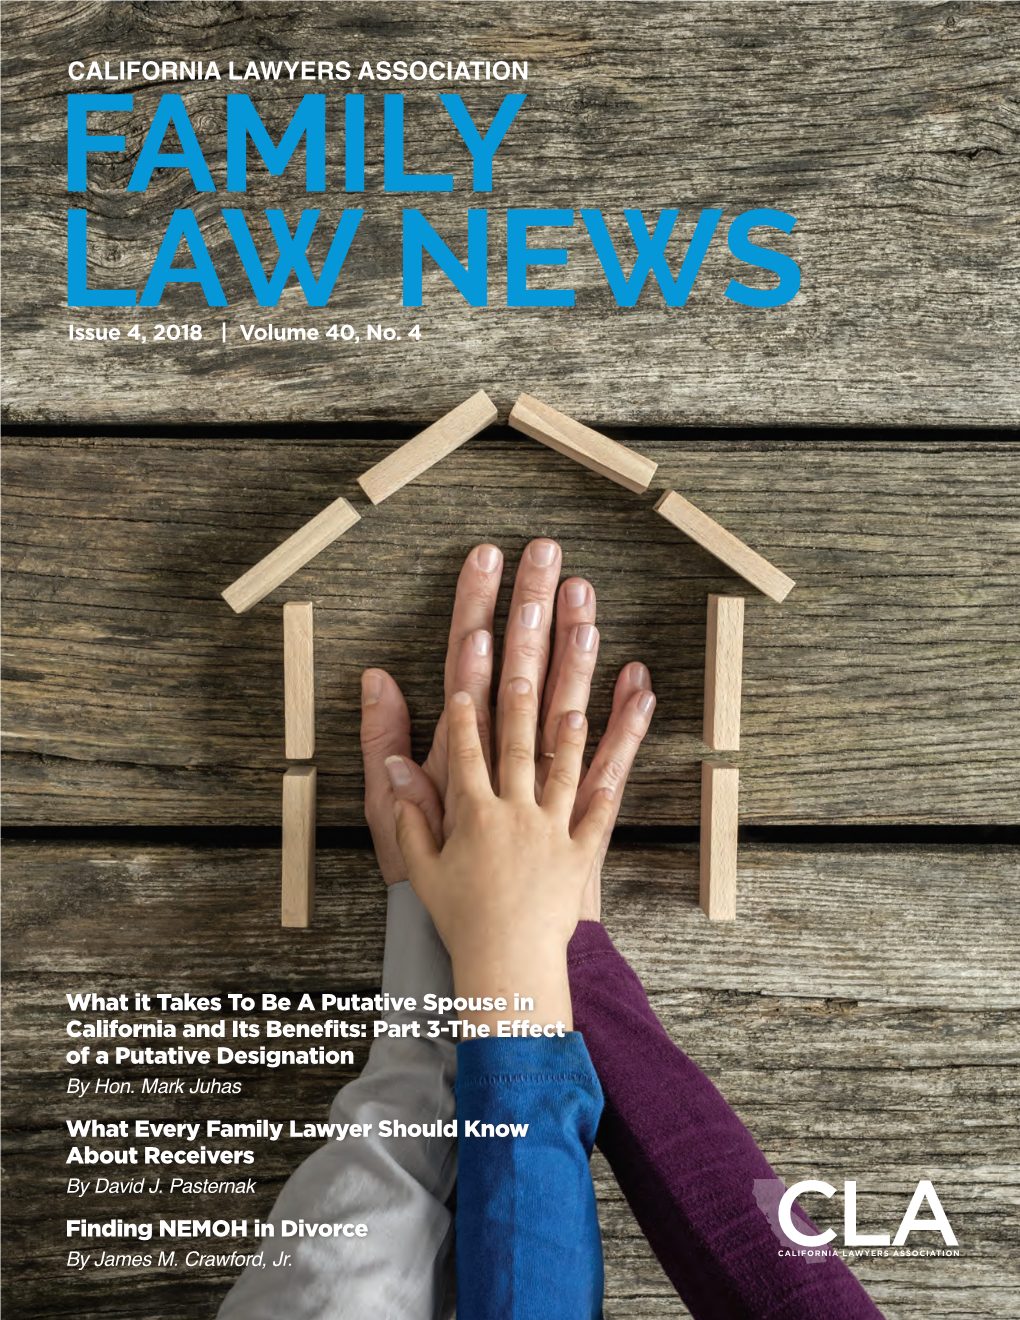 CALIFORNIA LAWYERS ASSOCIATION FAMILY LAW NEWS Issue 4, 2018 | Volume 40, No